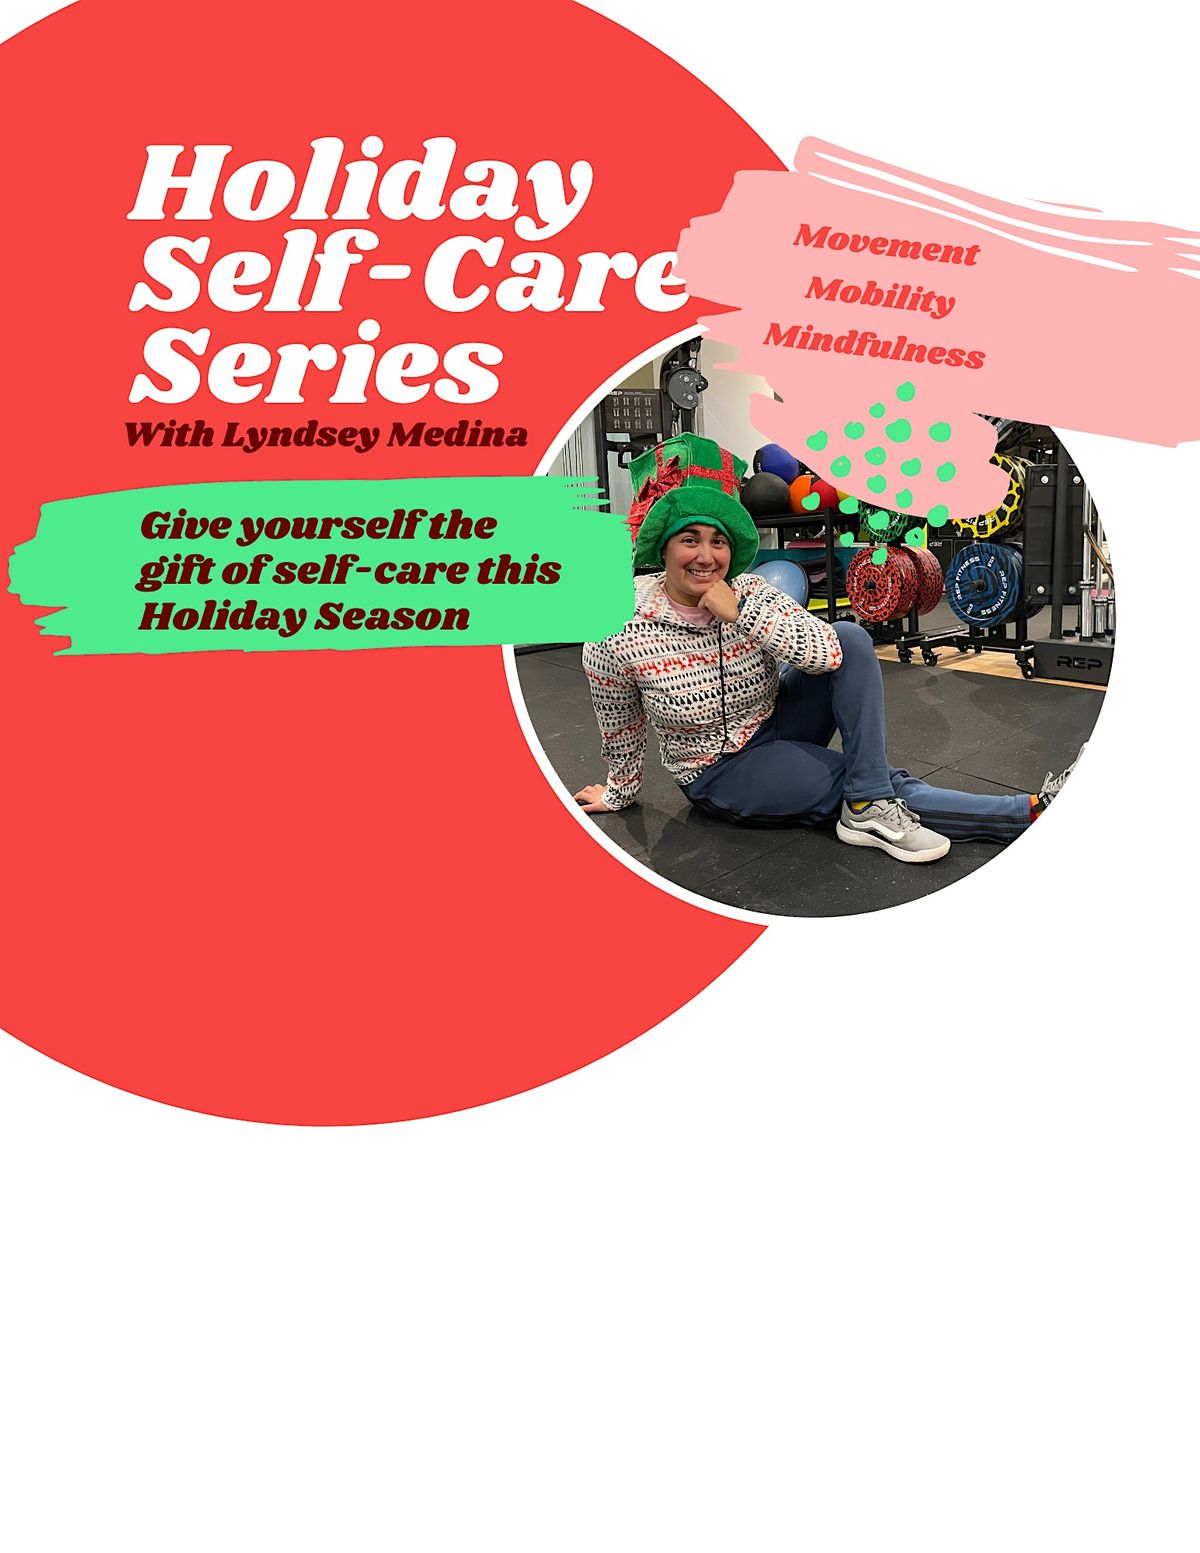 Holiday Self-Care Series